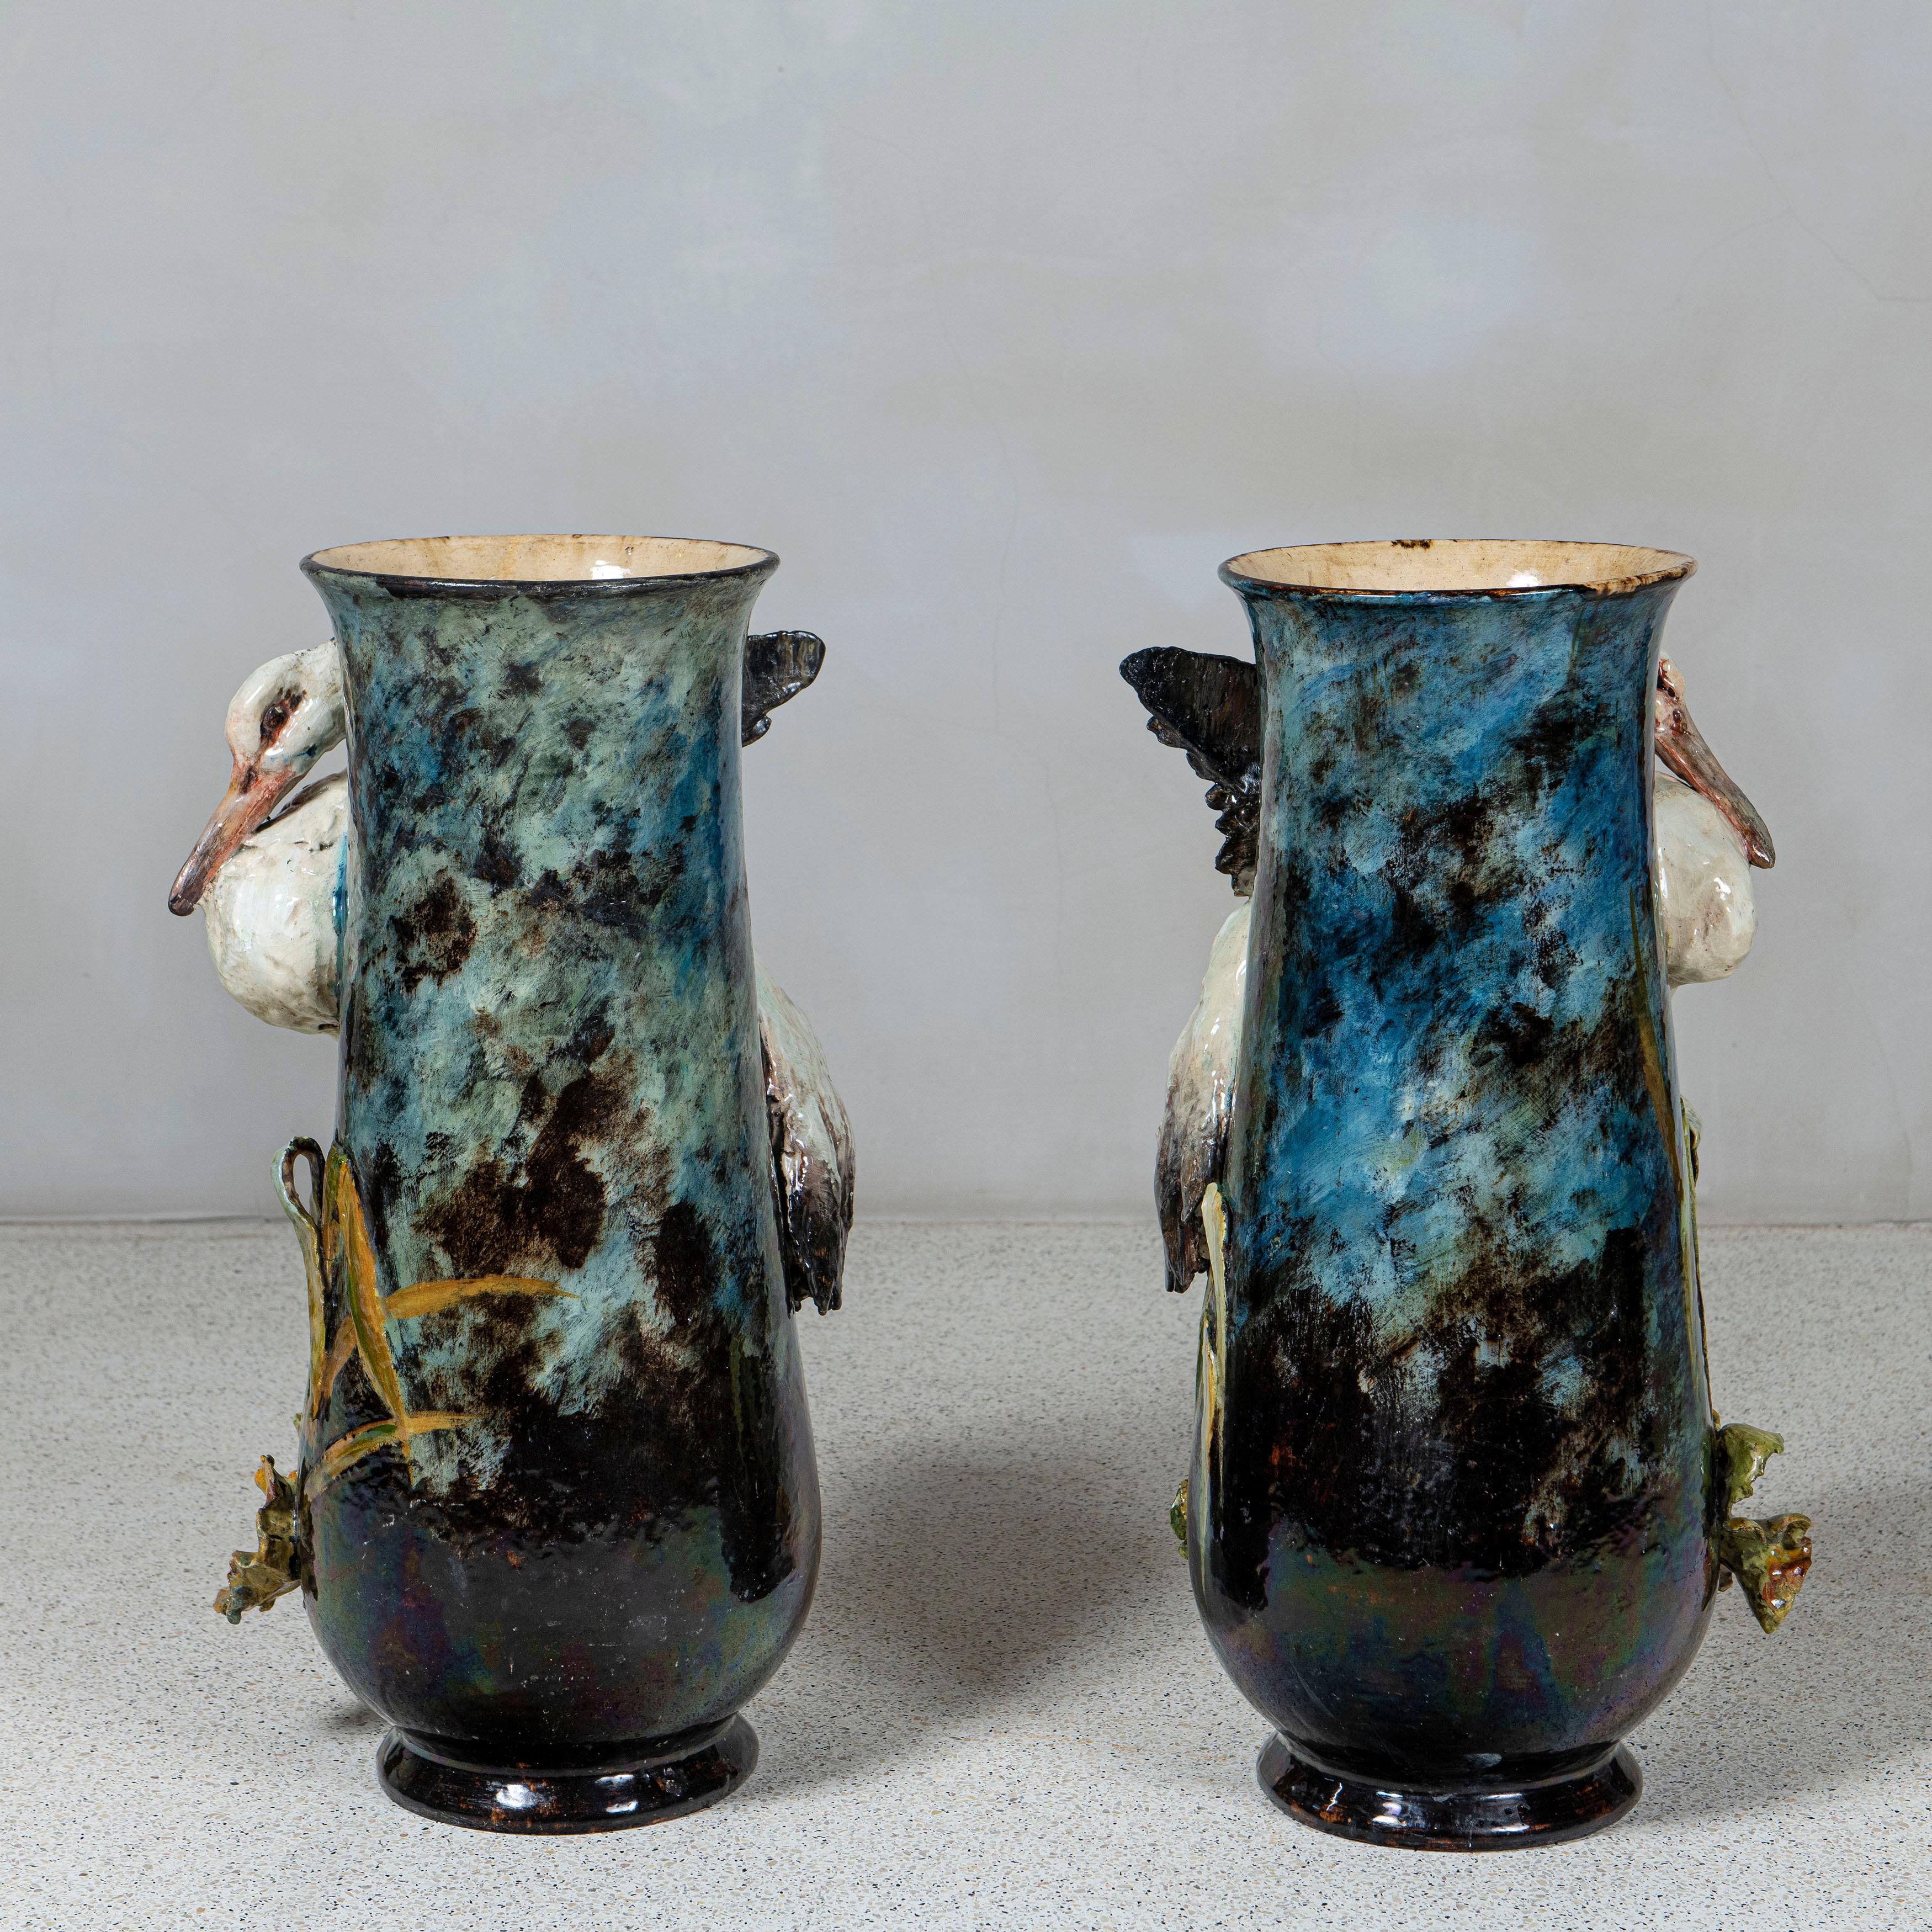 Art Nouveau Pair of Glazed Ceramic Barbotine Vases with Heron and Flowers, France, C. 1890 For Sale